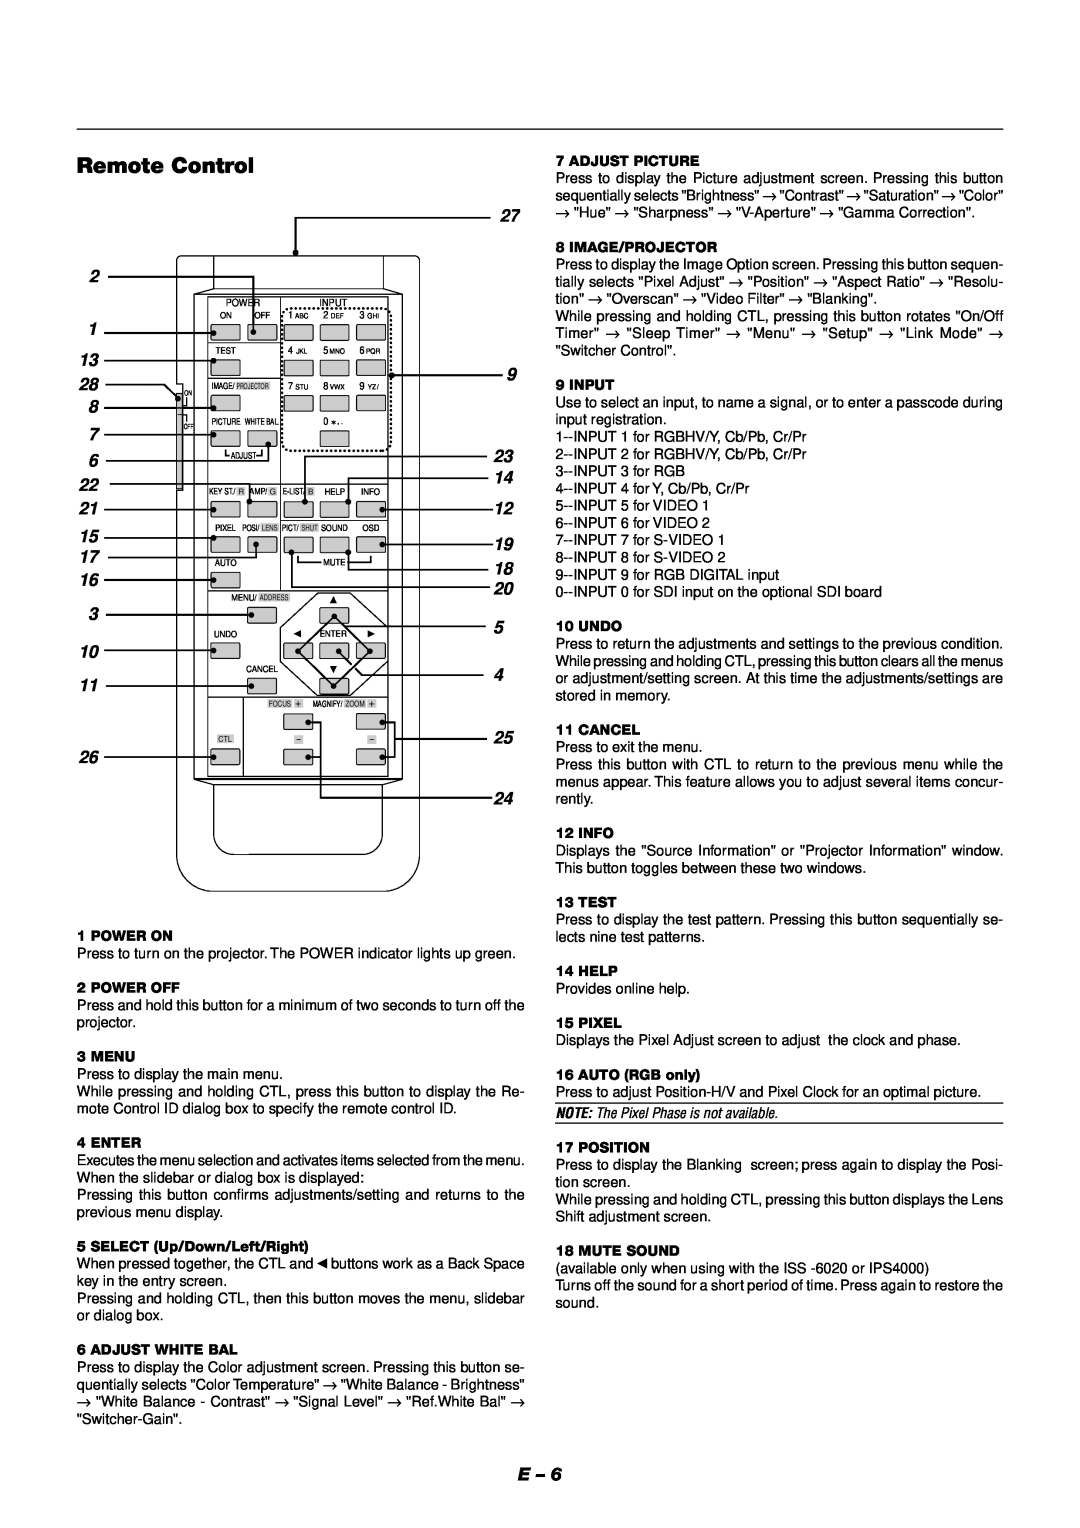 NEC XT9000 user manual Remote Control, NOTE The Pixel Phase is not available 